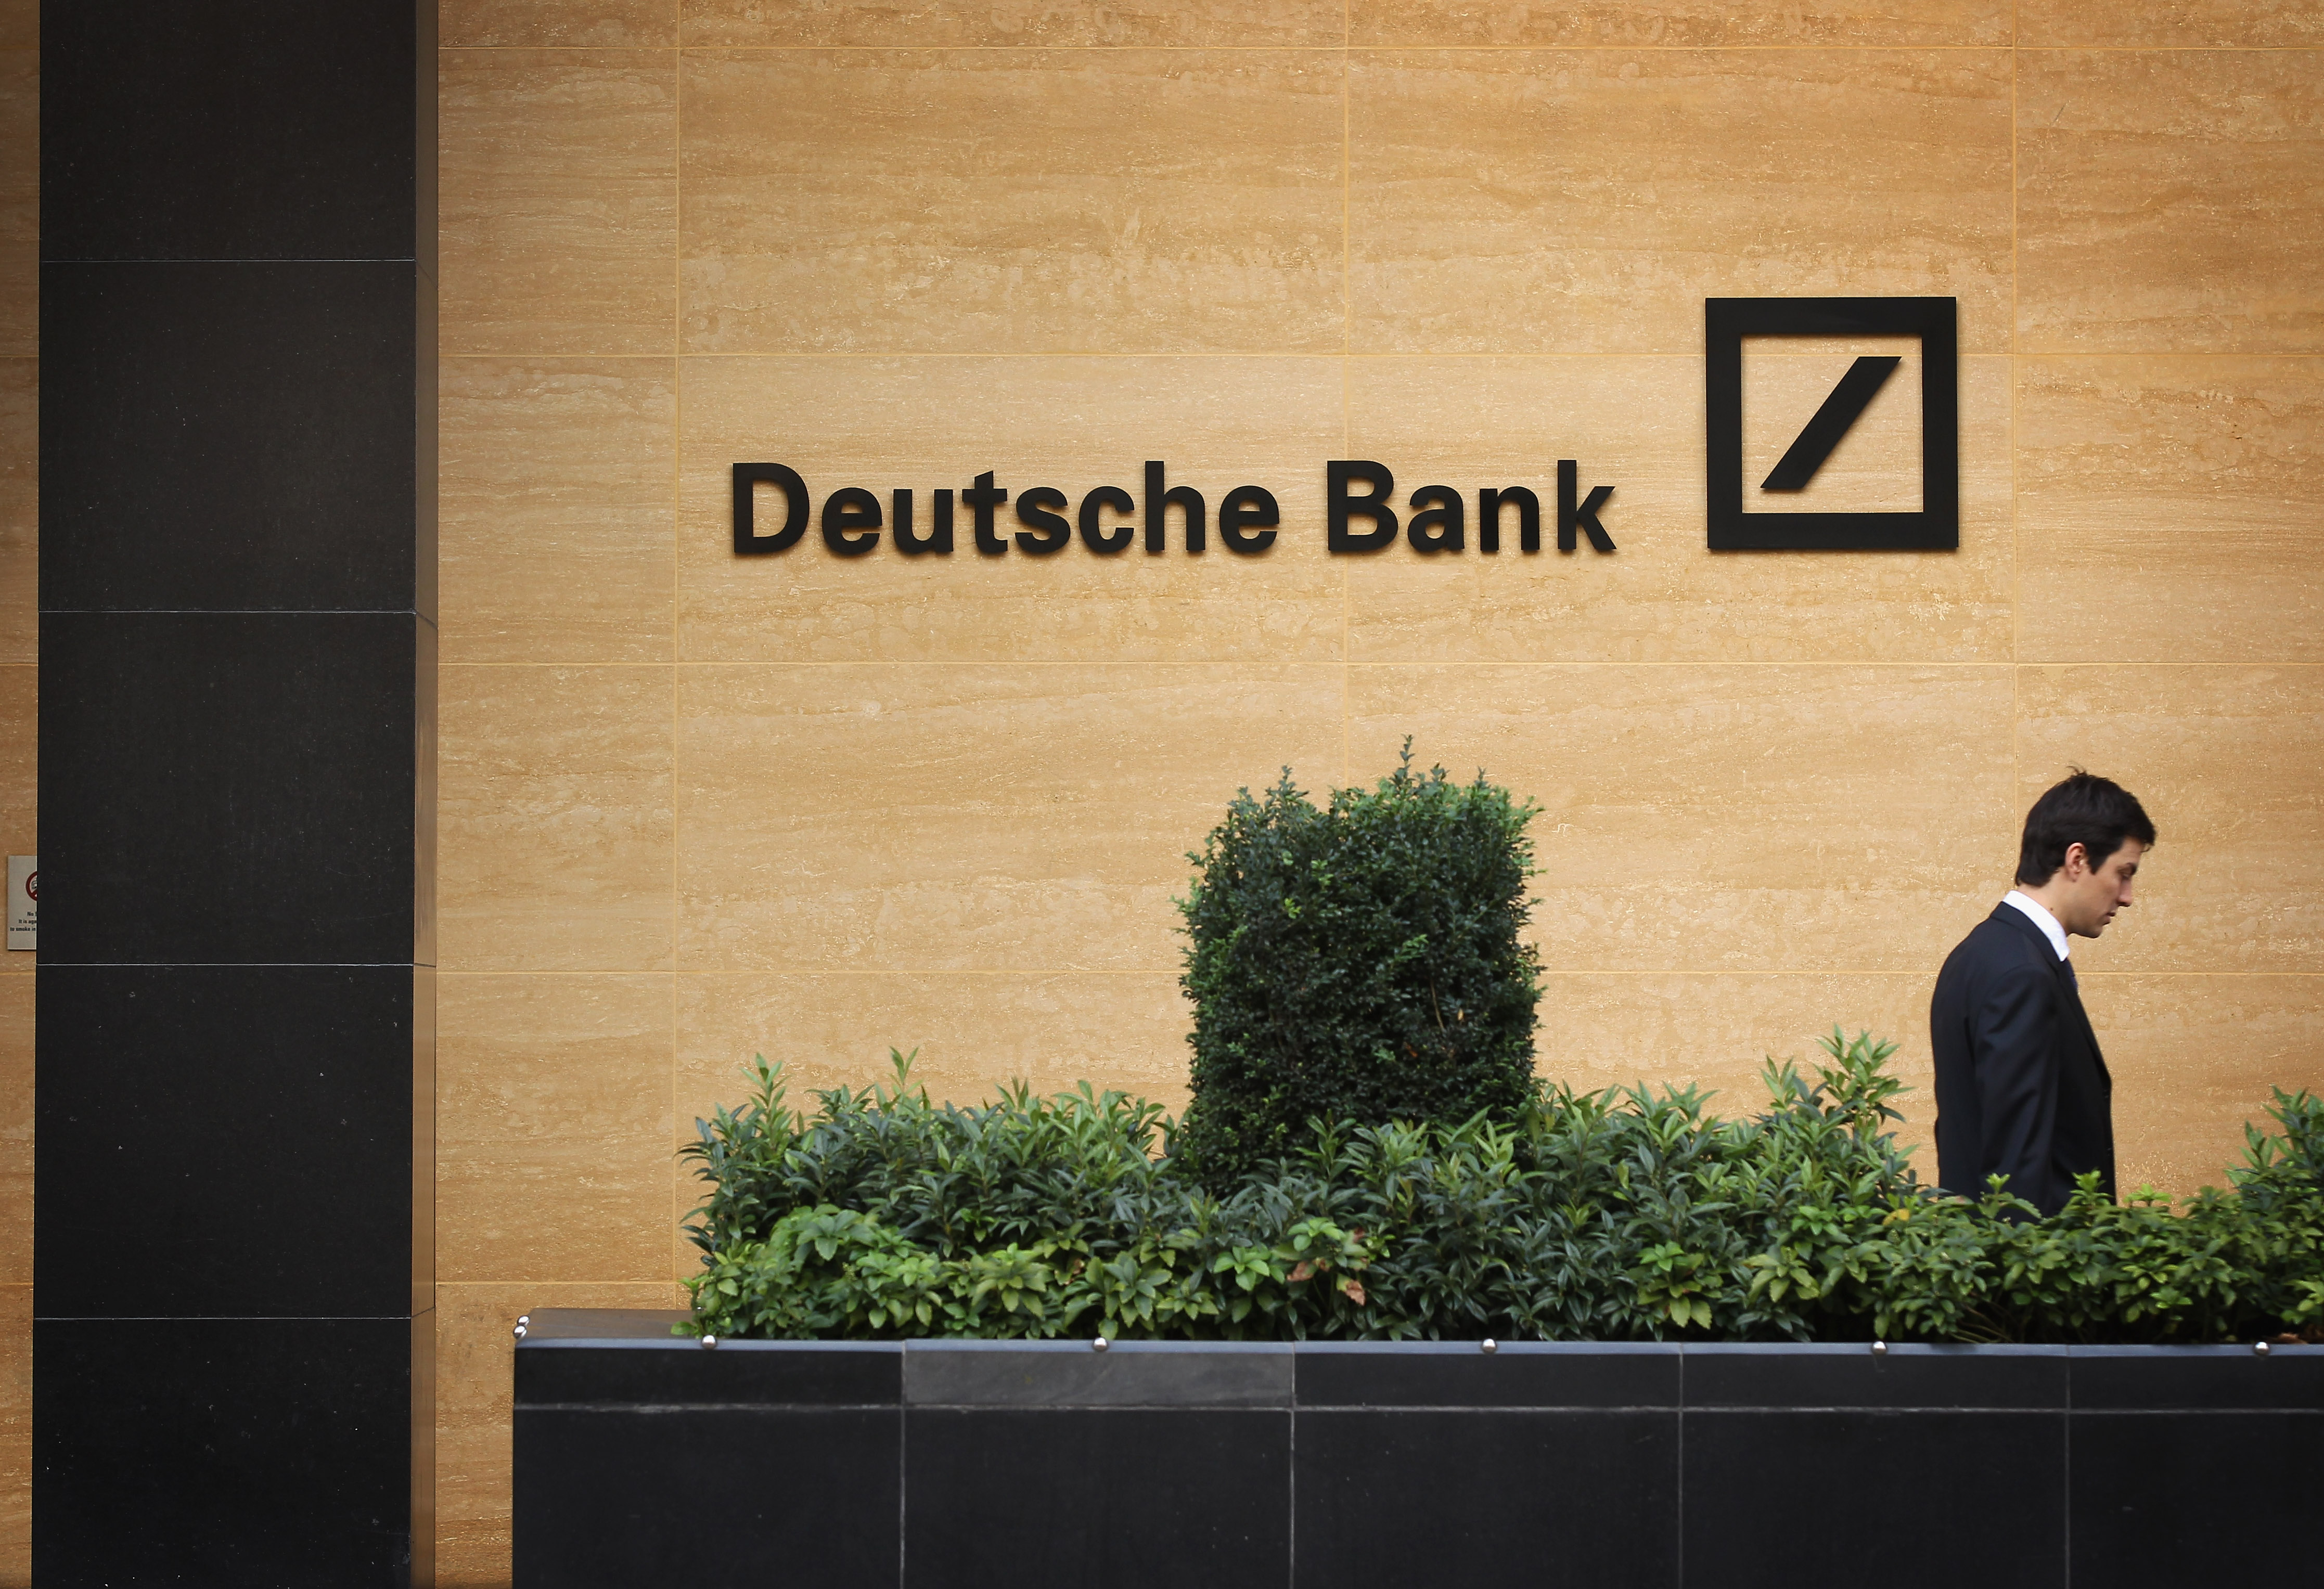 A general view of Deutsche Bank on Sept. 5, 2011 in London.